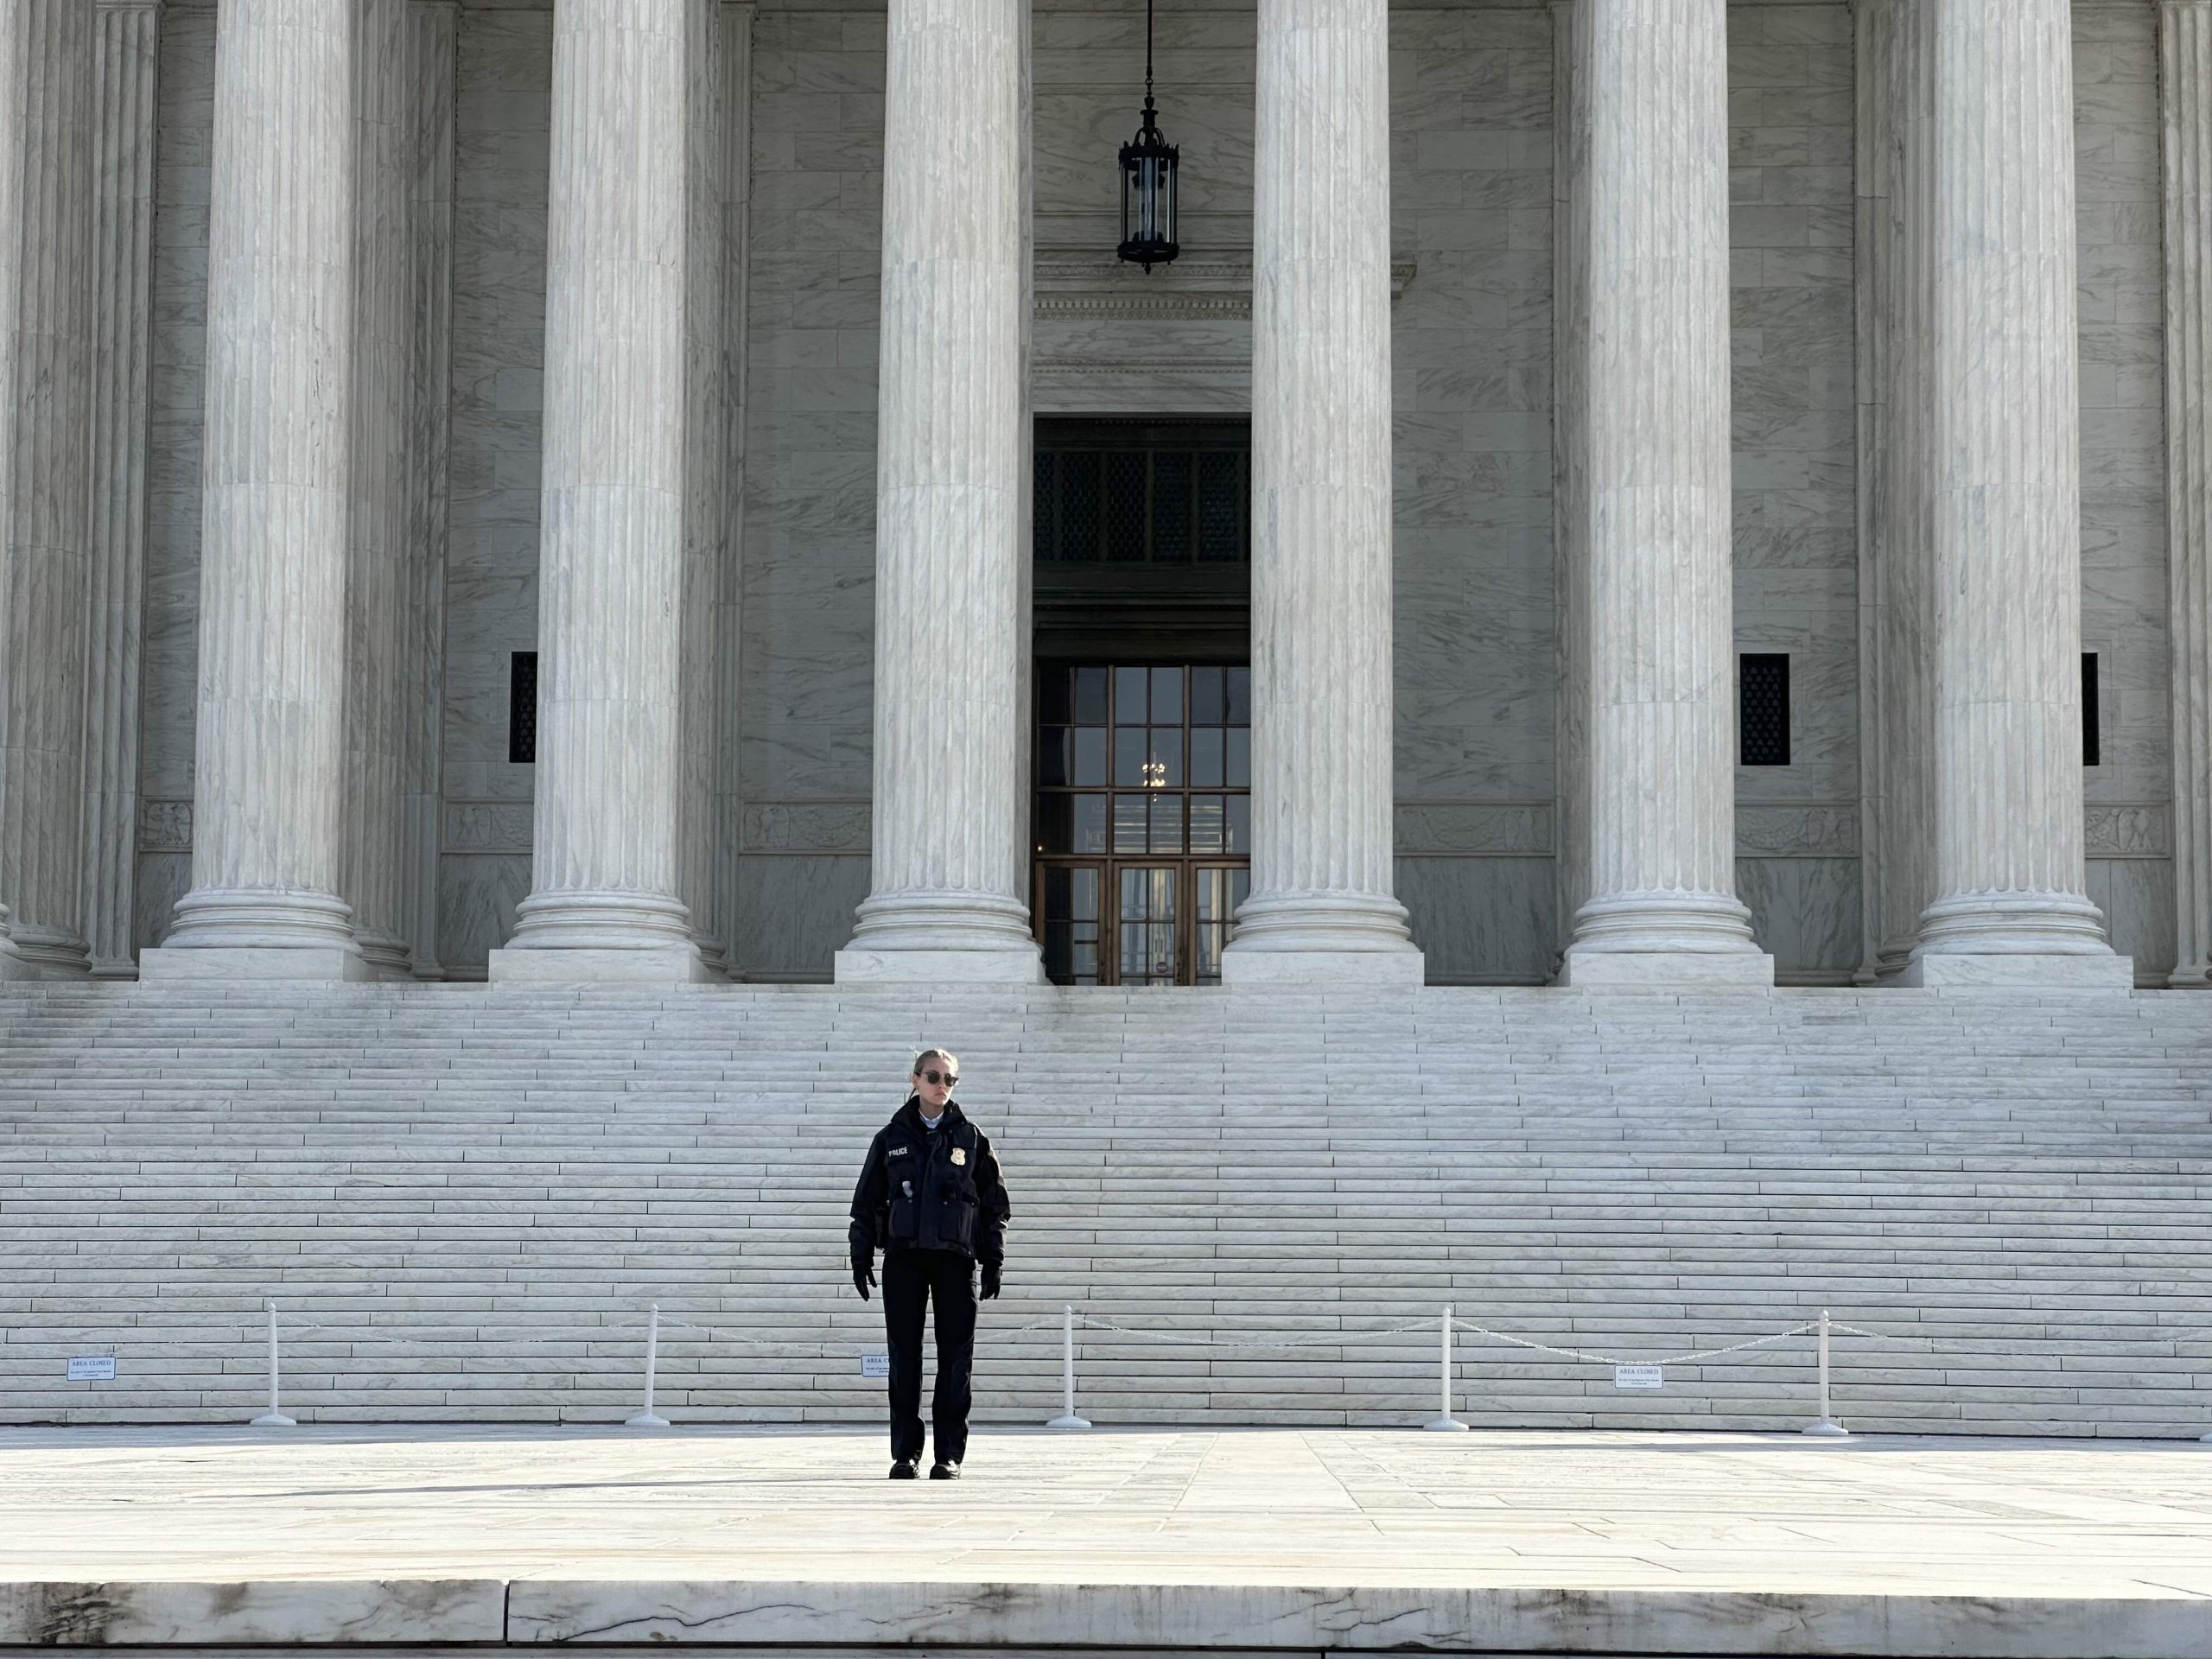 Police officer standing on the Supreme Court steps